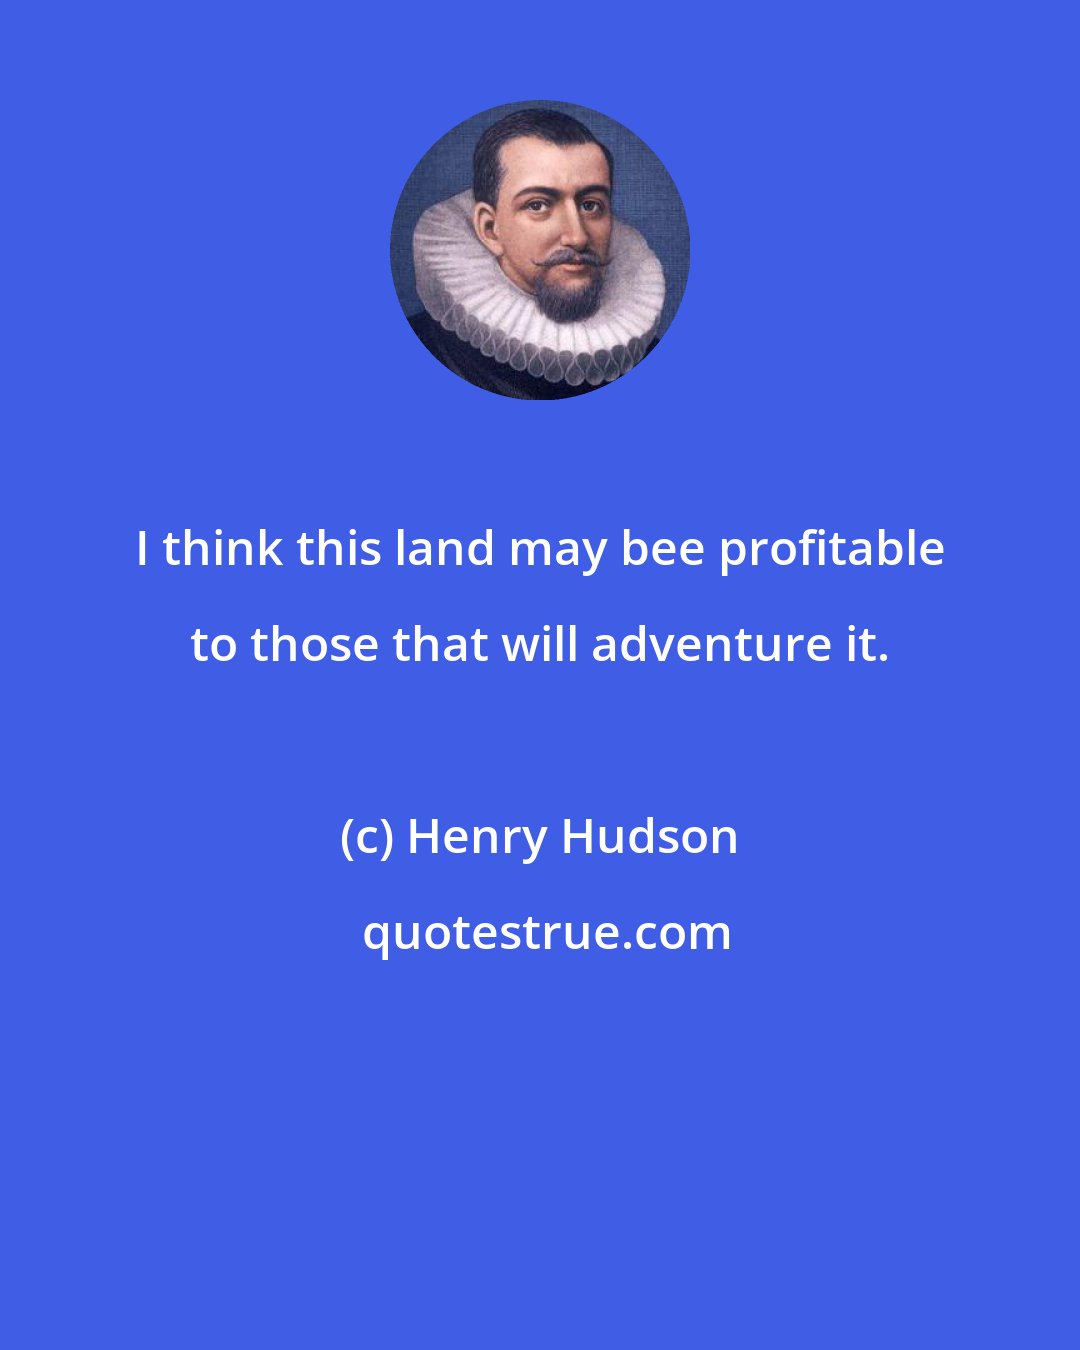 Henry Hudson: I think this land may bee profitable to those that will adventure it.